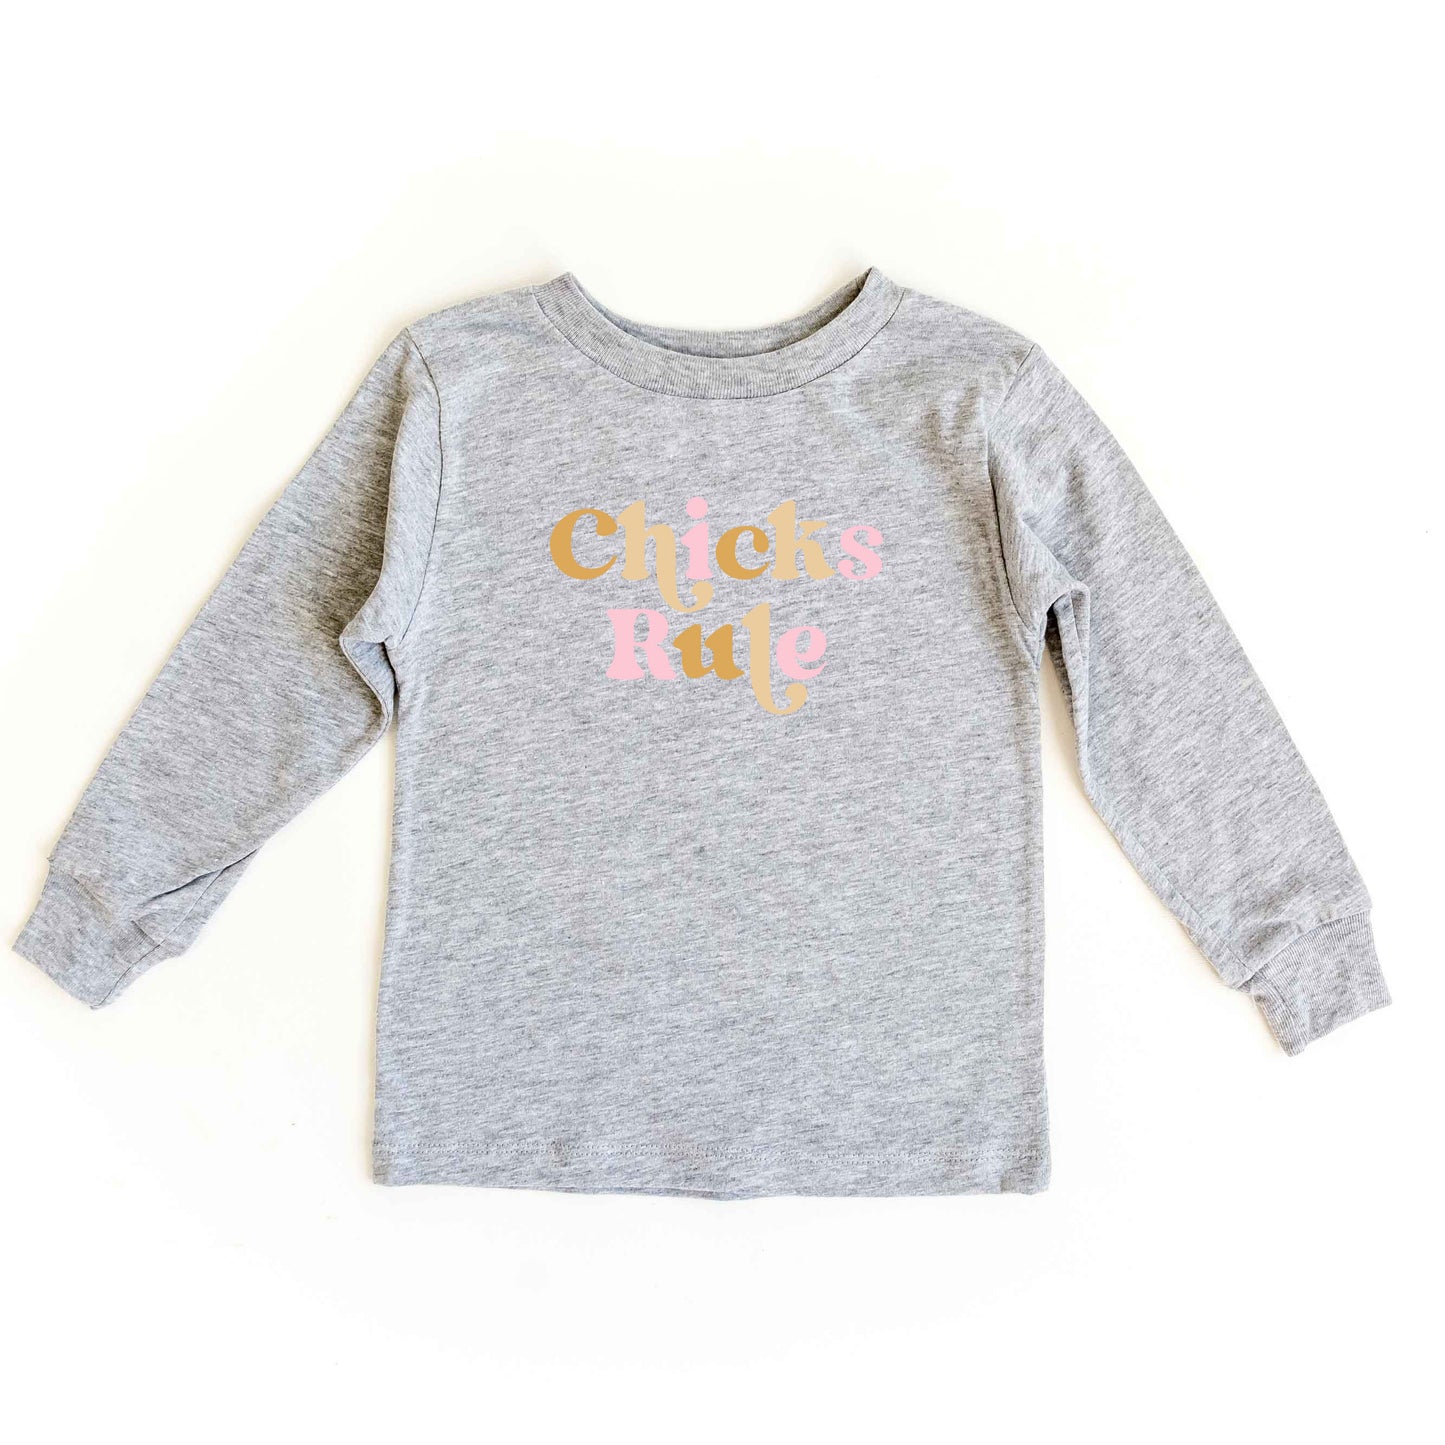 Chicks Rule Colorful | Toddler Long Sleeve Tee